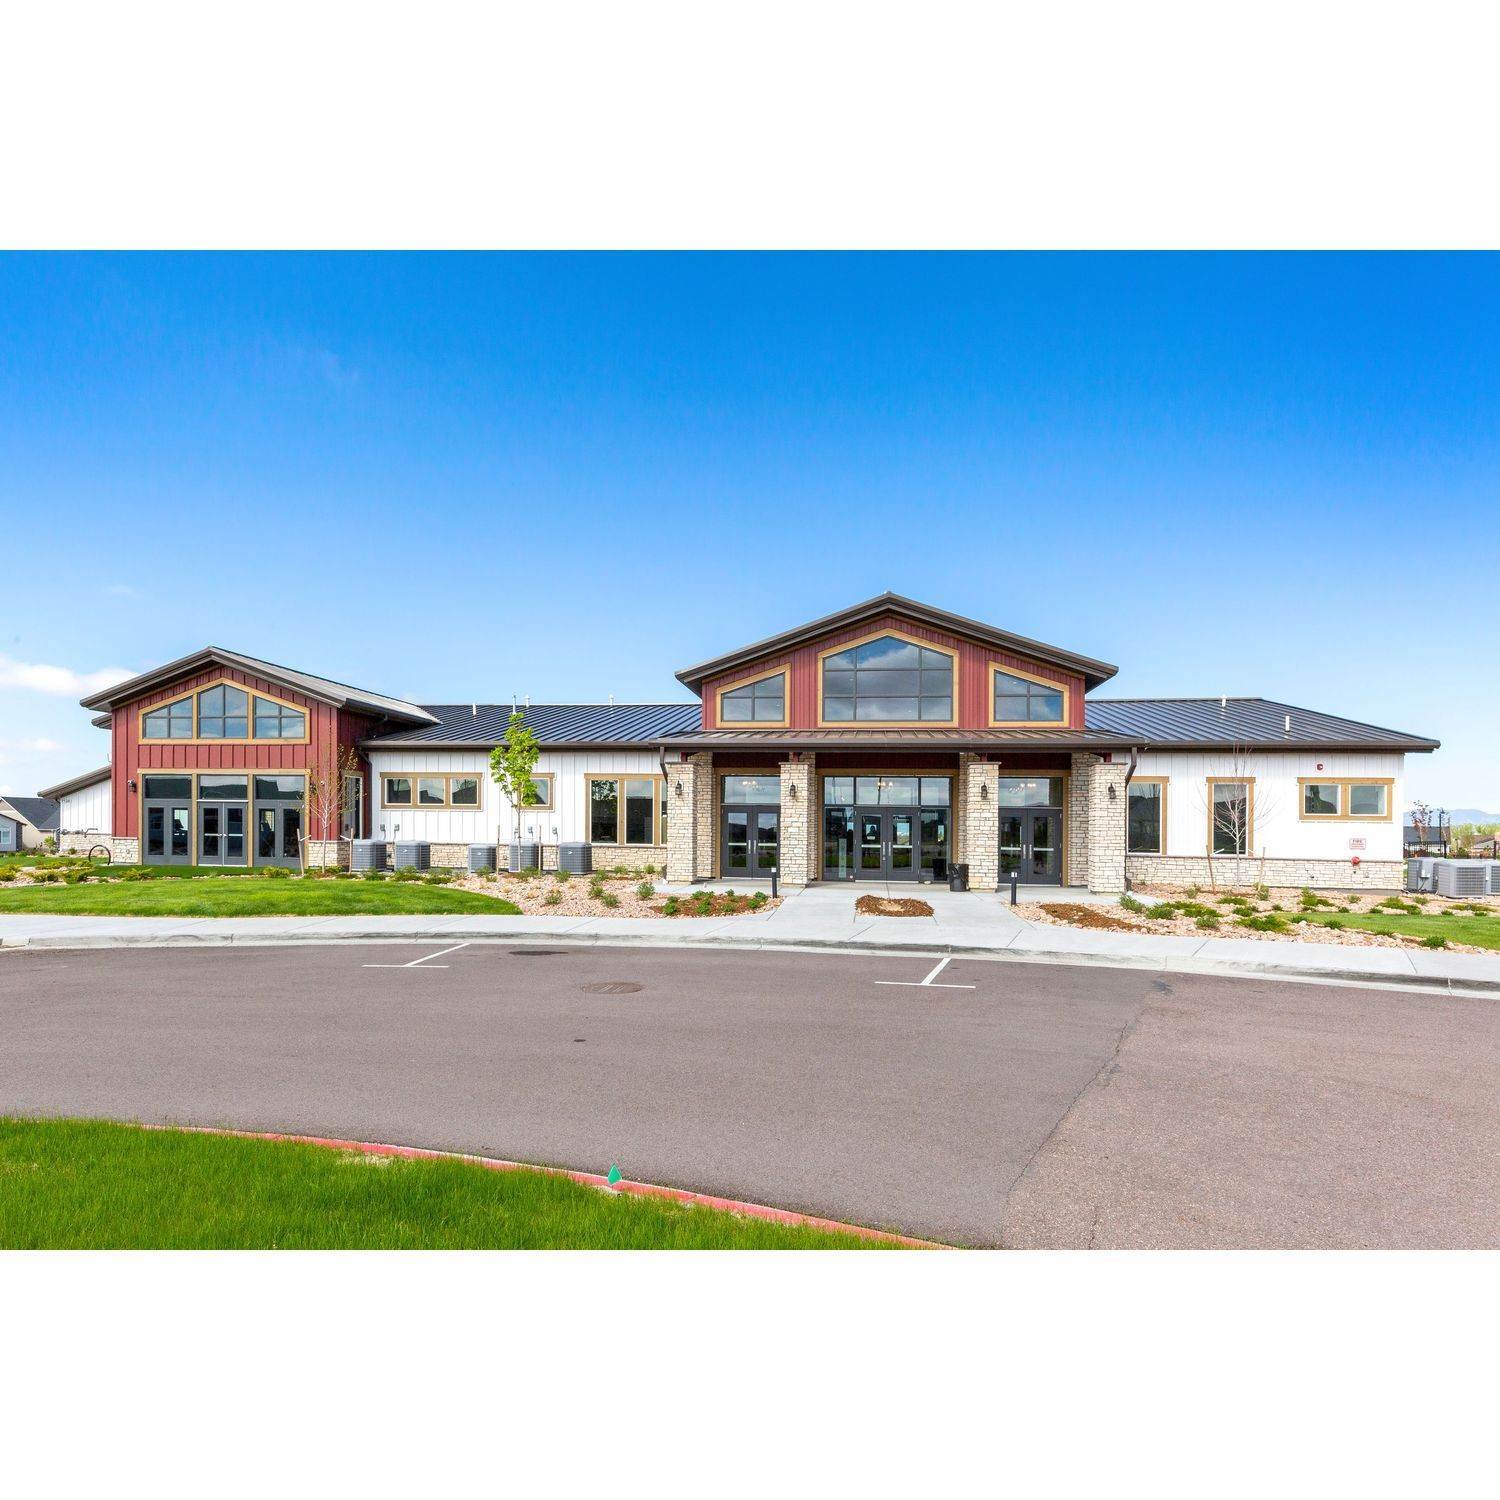 16. The Retreat in Banning Lewis Ranch κτίριο σε 9158 Braemore Heights, Colorado Springs, CO 80927